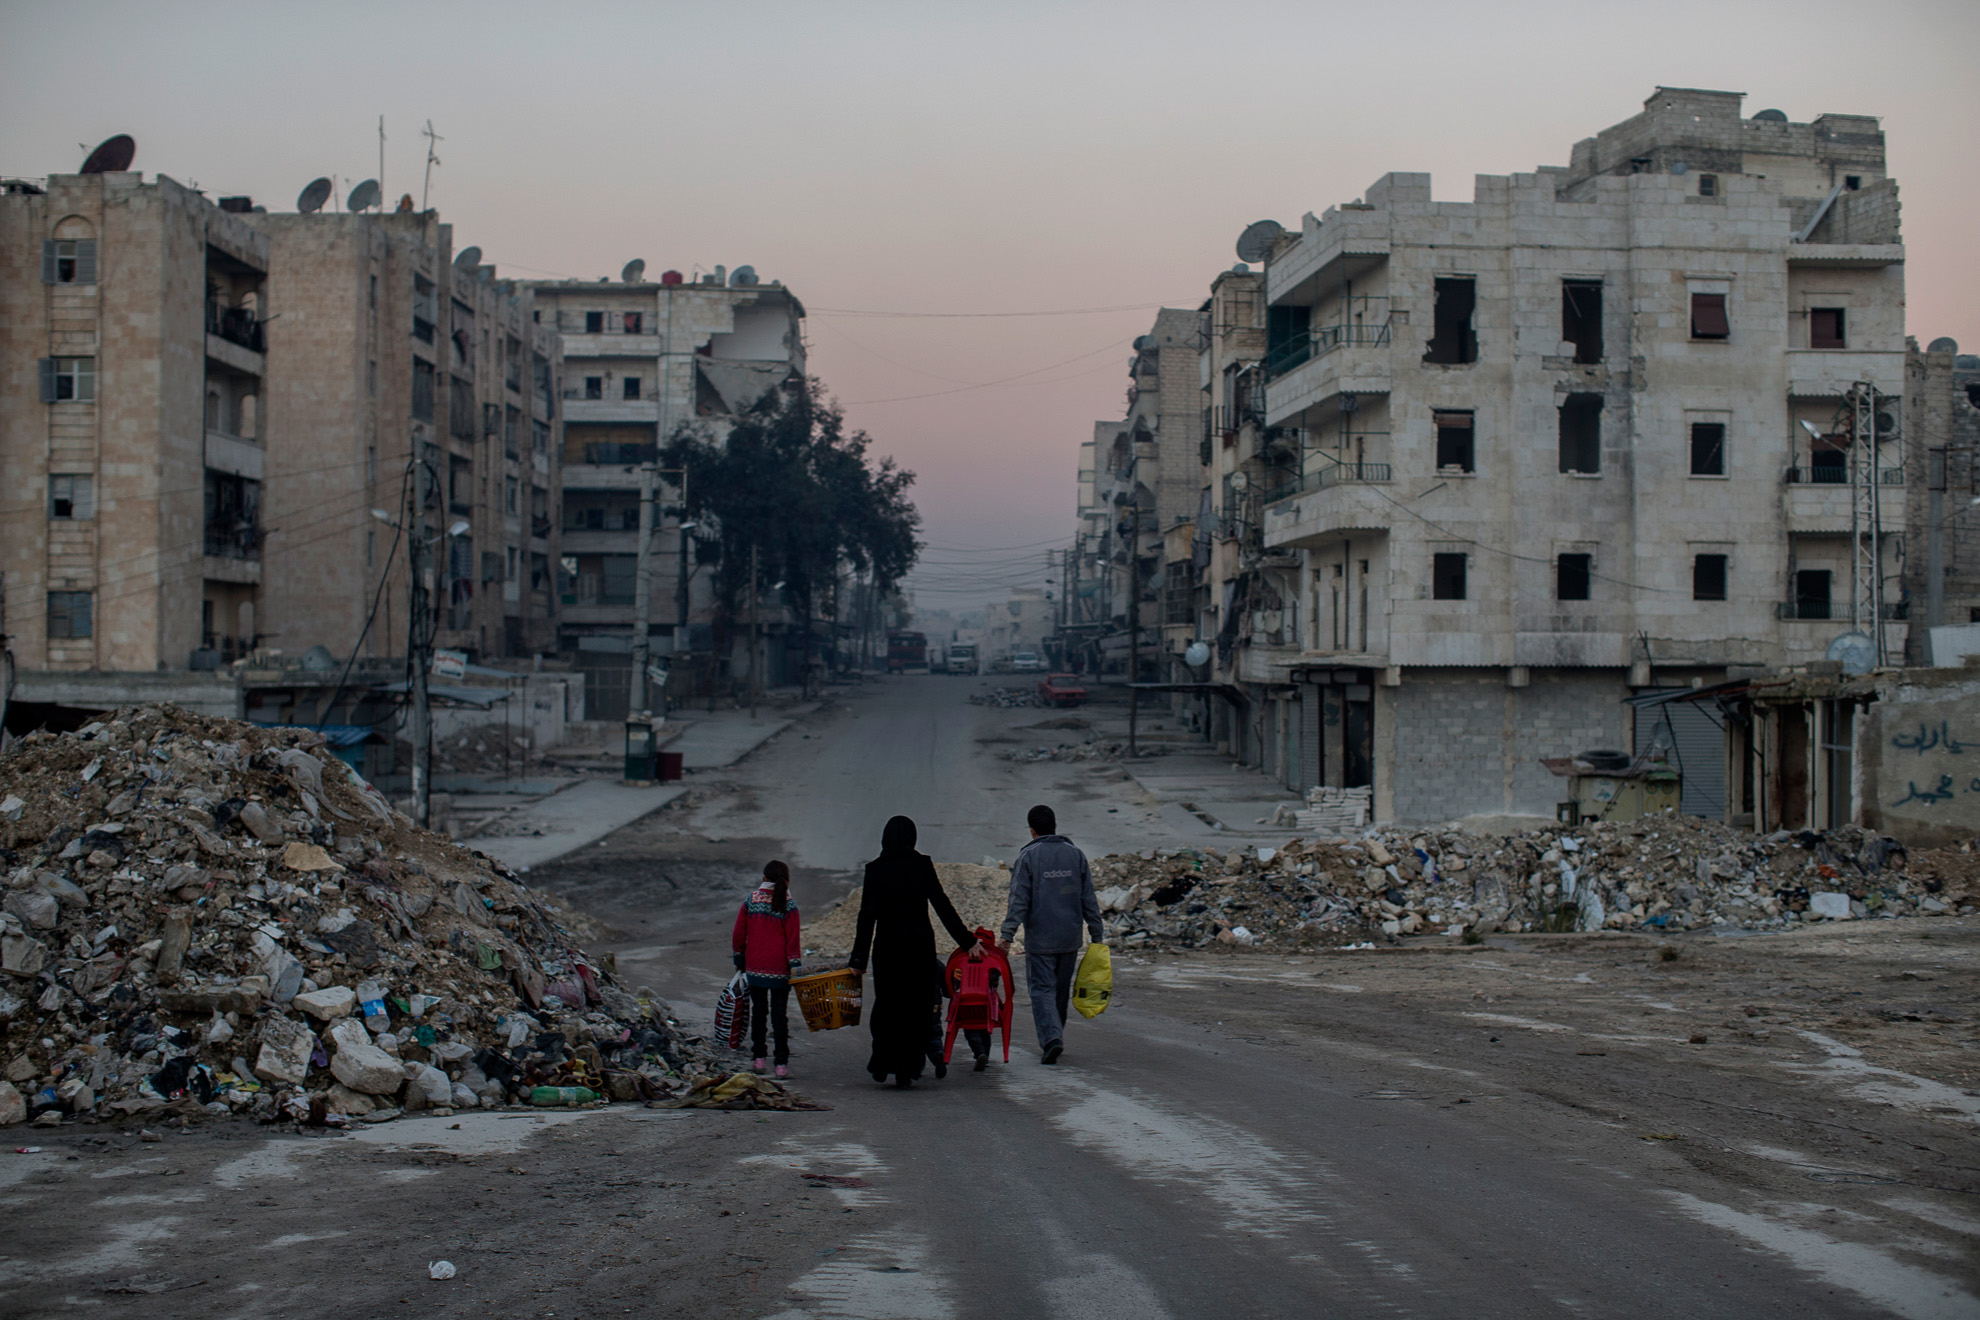 Aleppo, Syria. 2013-01-15. A family walks on empty streets of Aleppo. Trying to live a life in the war torn city.